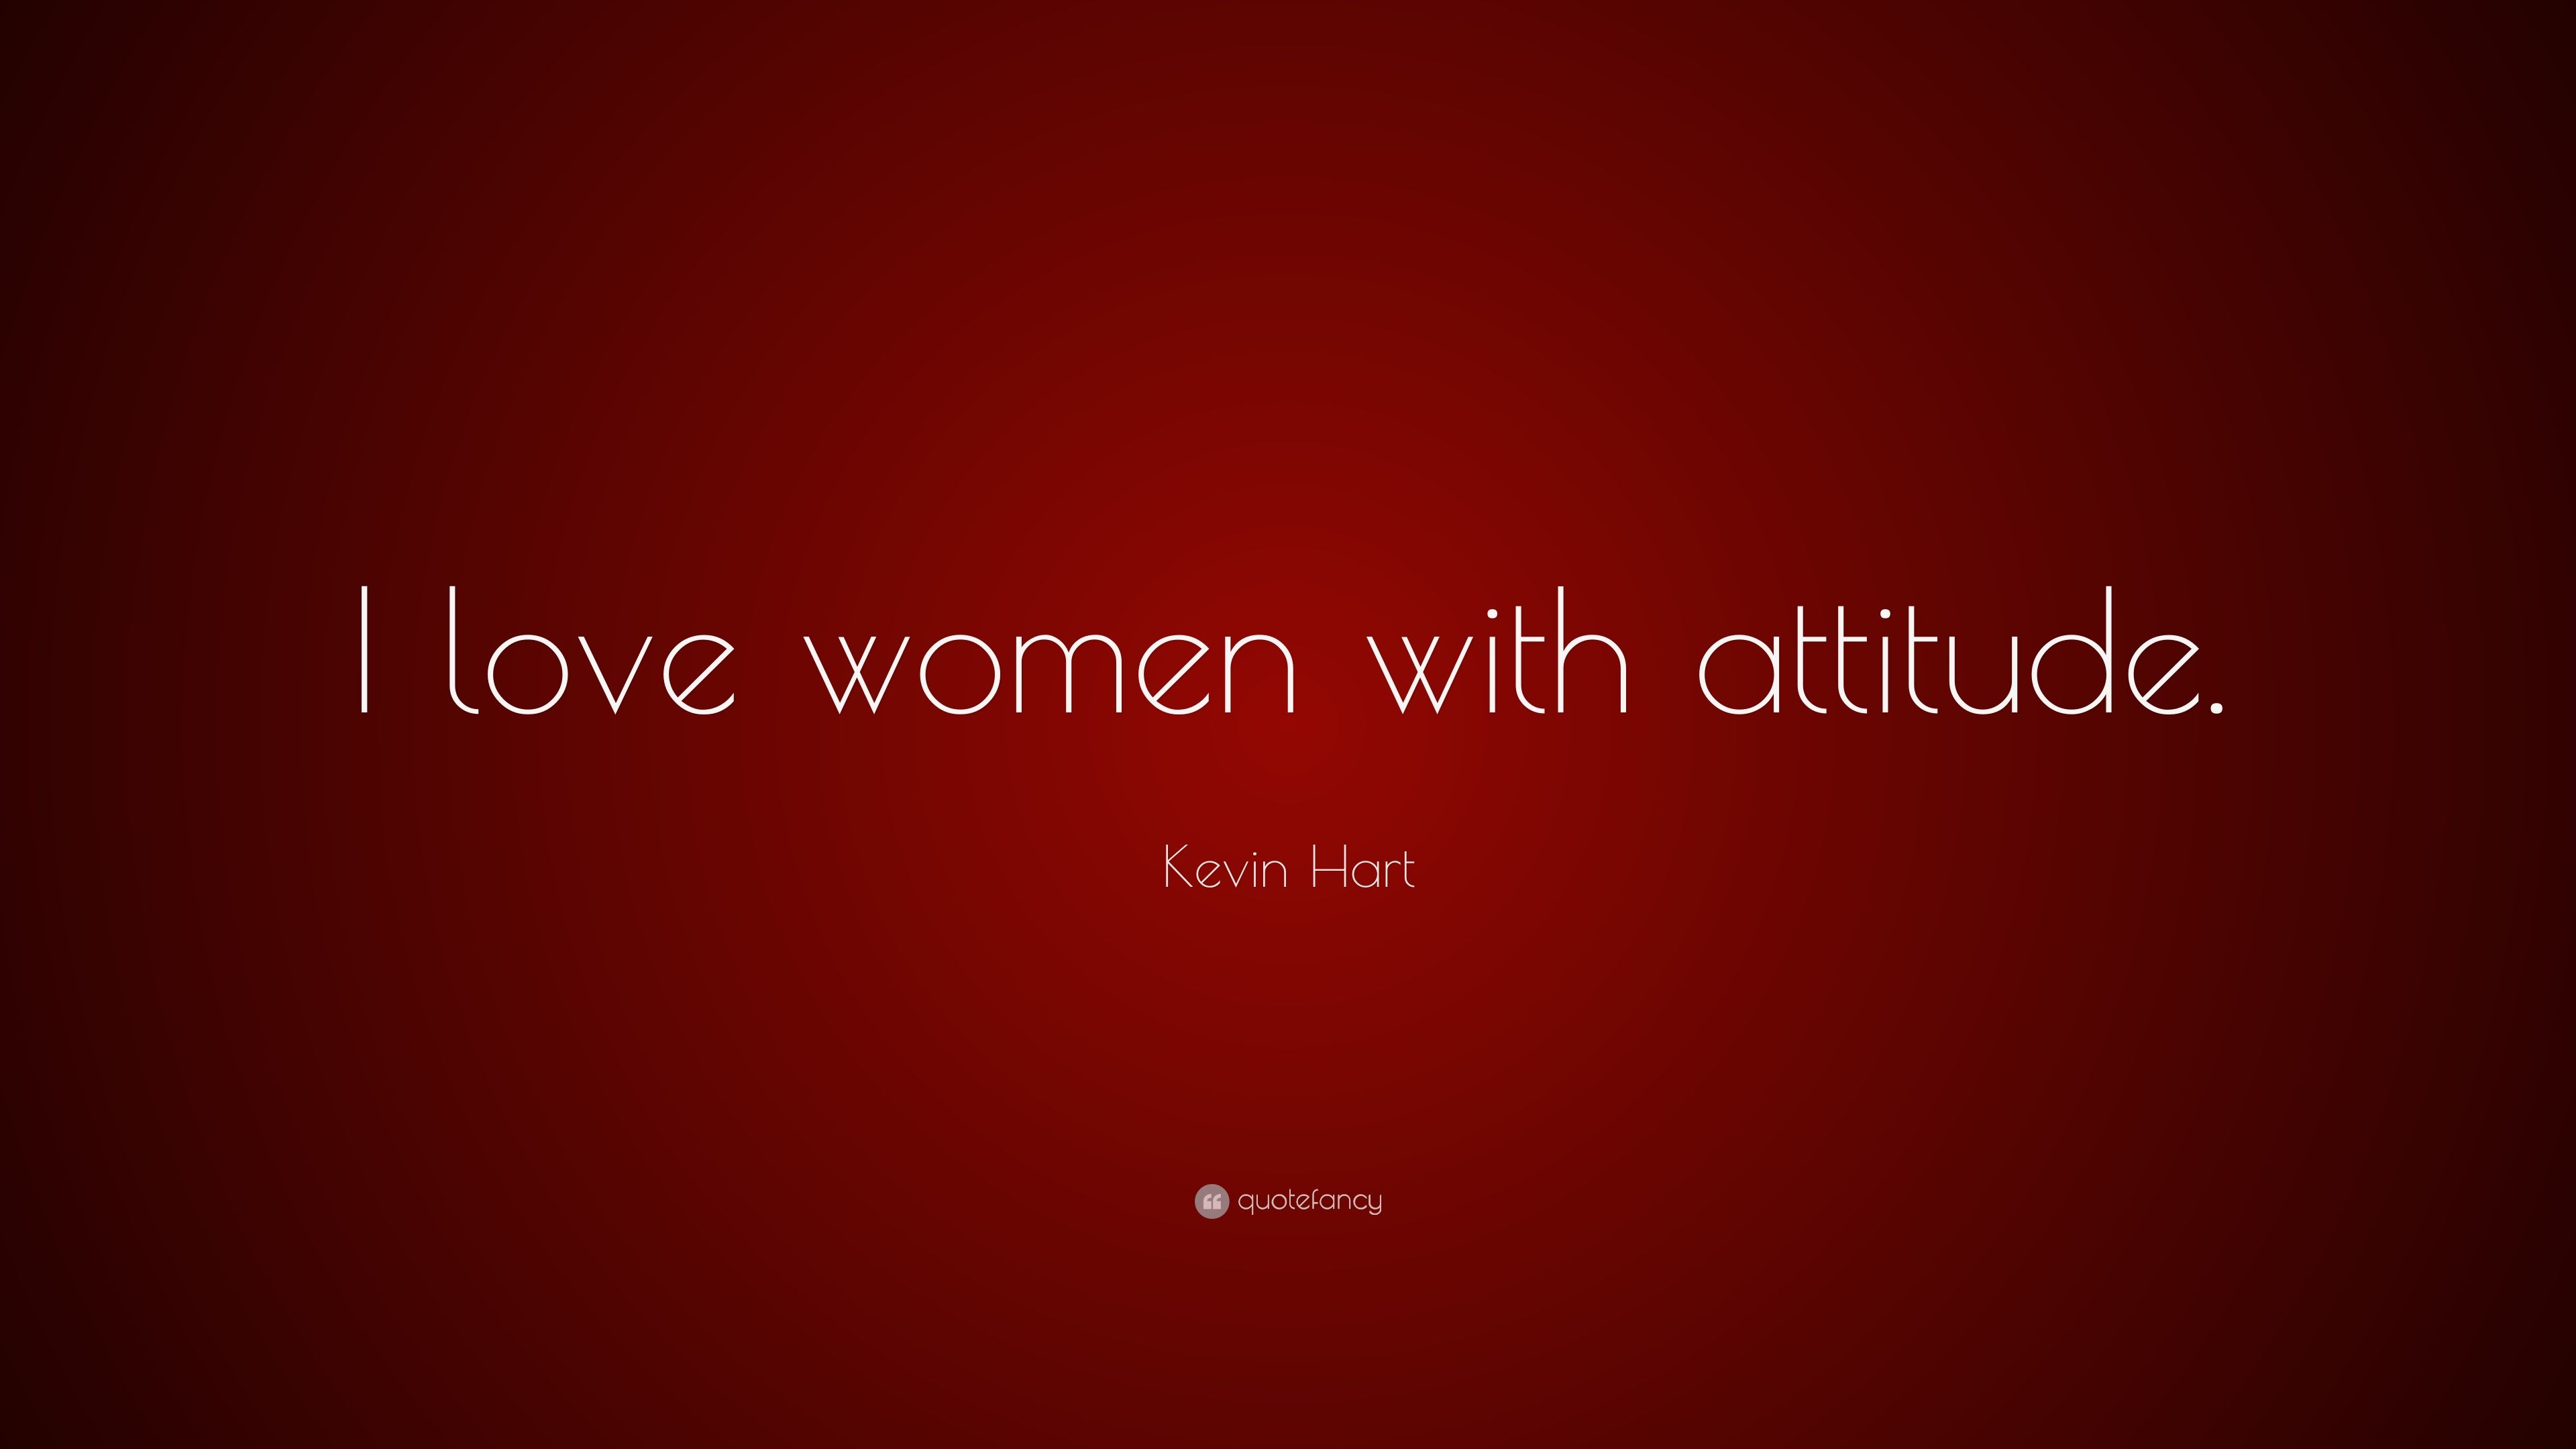 Kevin Hart Quote: “I love women with attitude.” 7 wallpaper